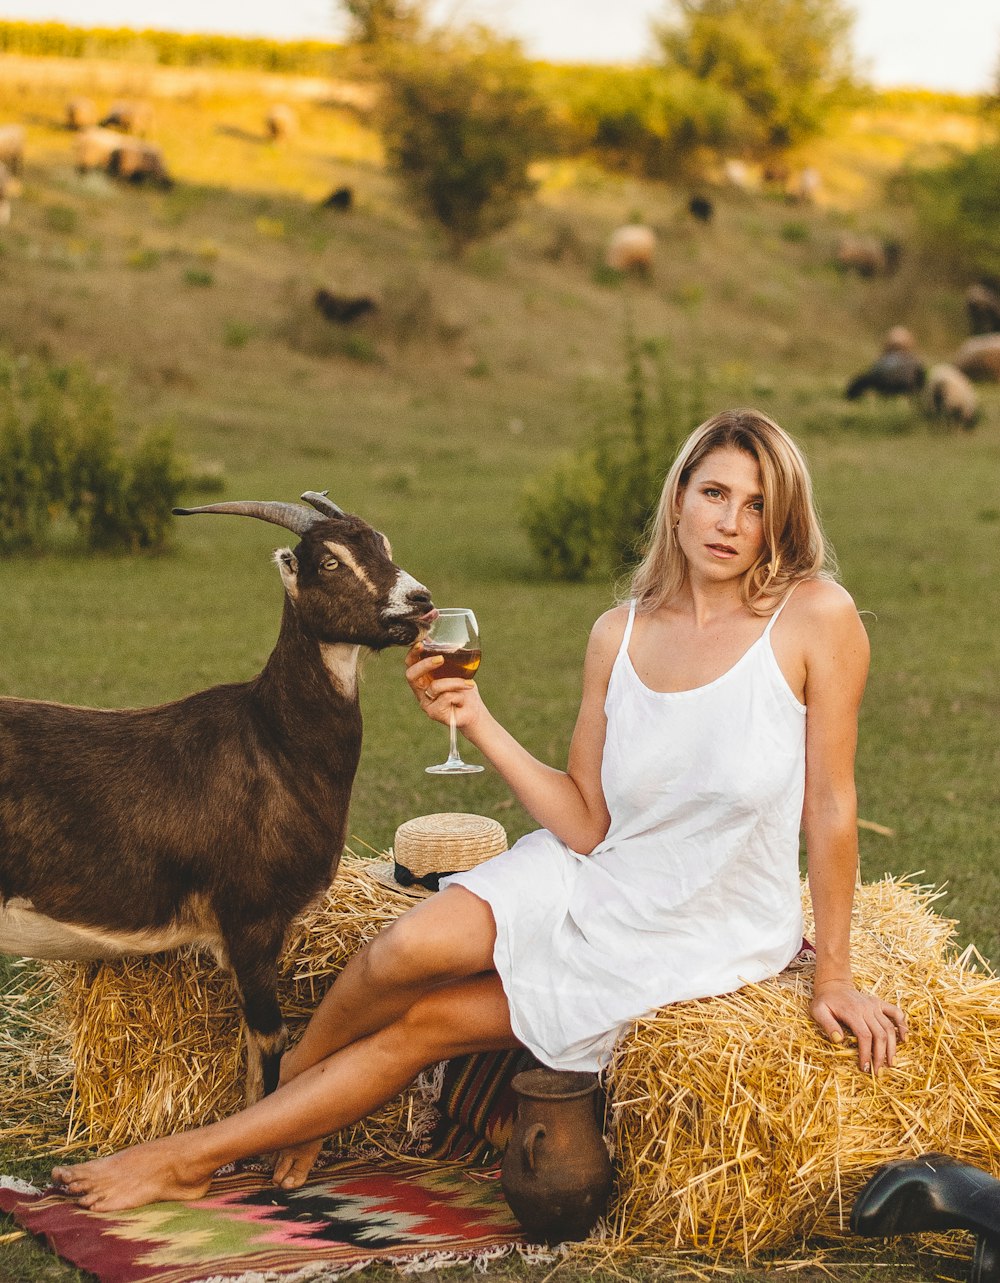 woman in white tank top sitting on brown hay with black and white goat